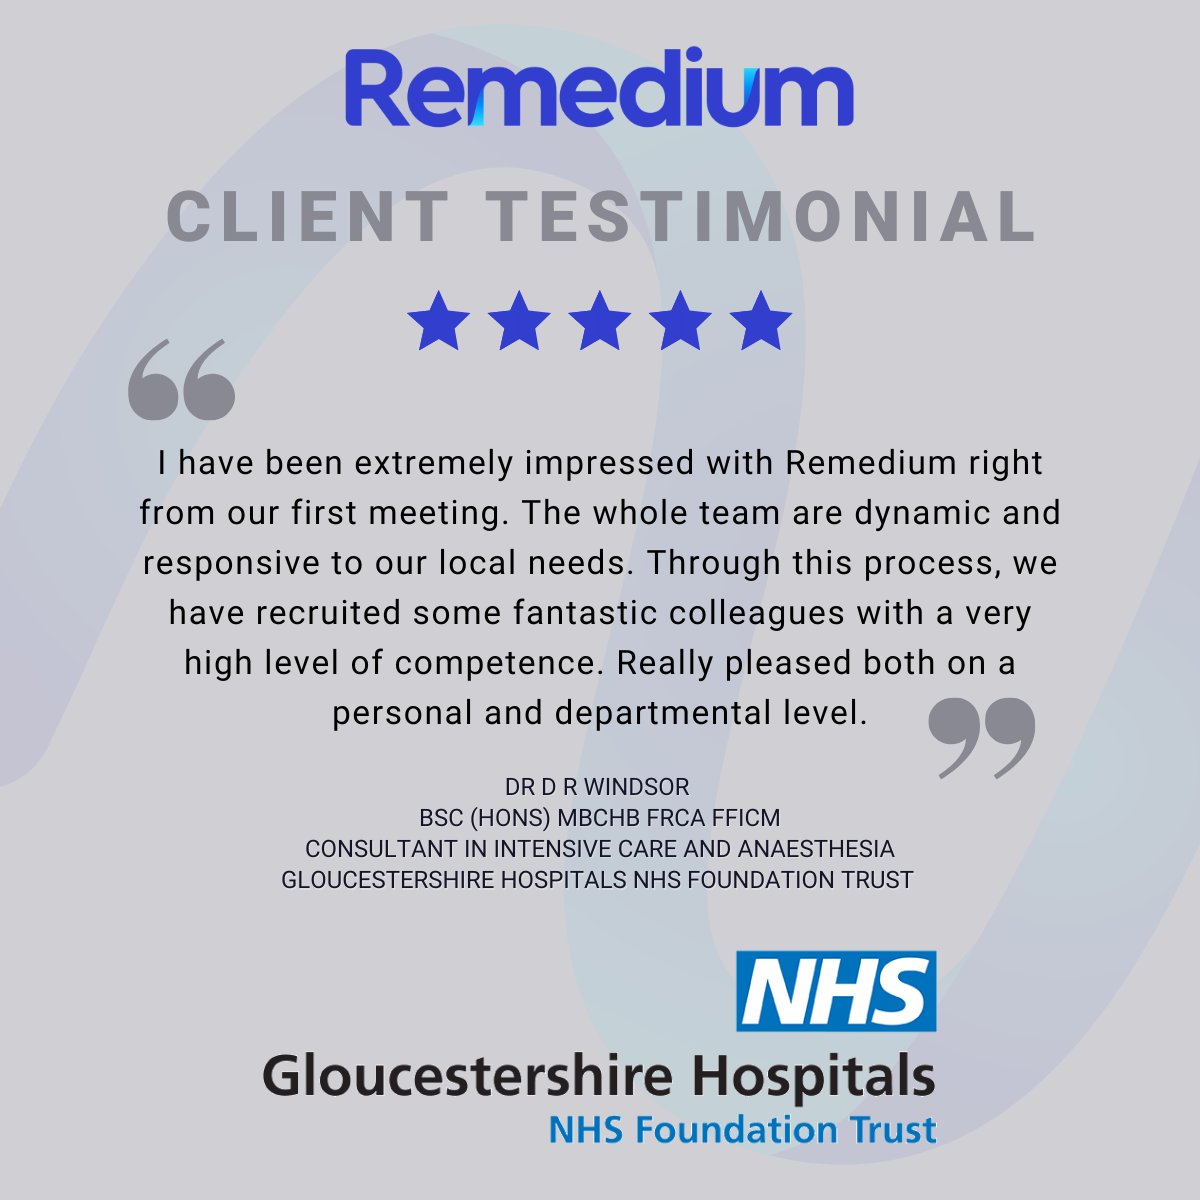 Remedium recently worked with the amazing team at Gloucestershire Hospitals NHS Foundation Trust to plan and implement a face-to-face international recruitment drive in Mumbai. Watch our latest case study video to find out more ➡️ remediumpartners.com/client-case-st…